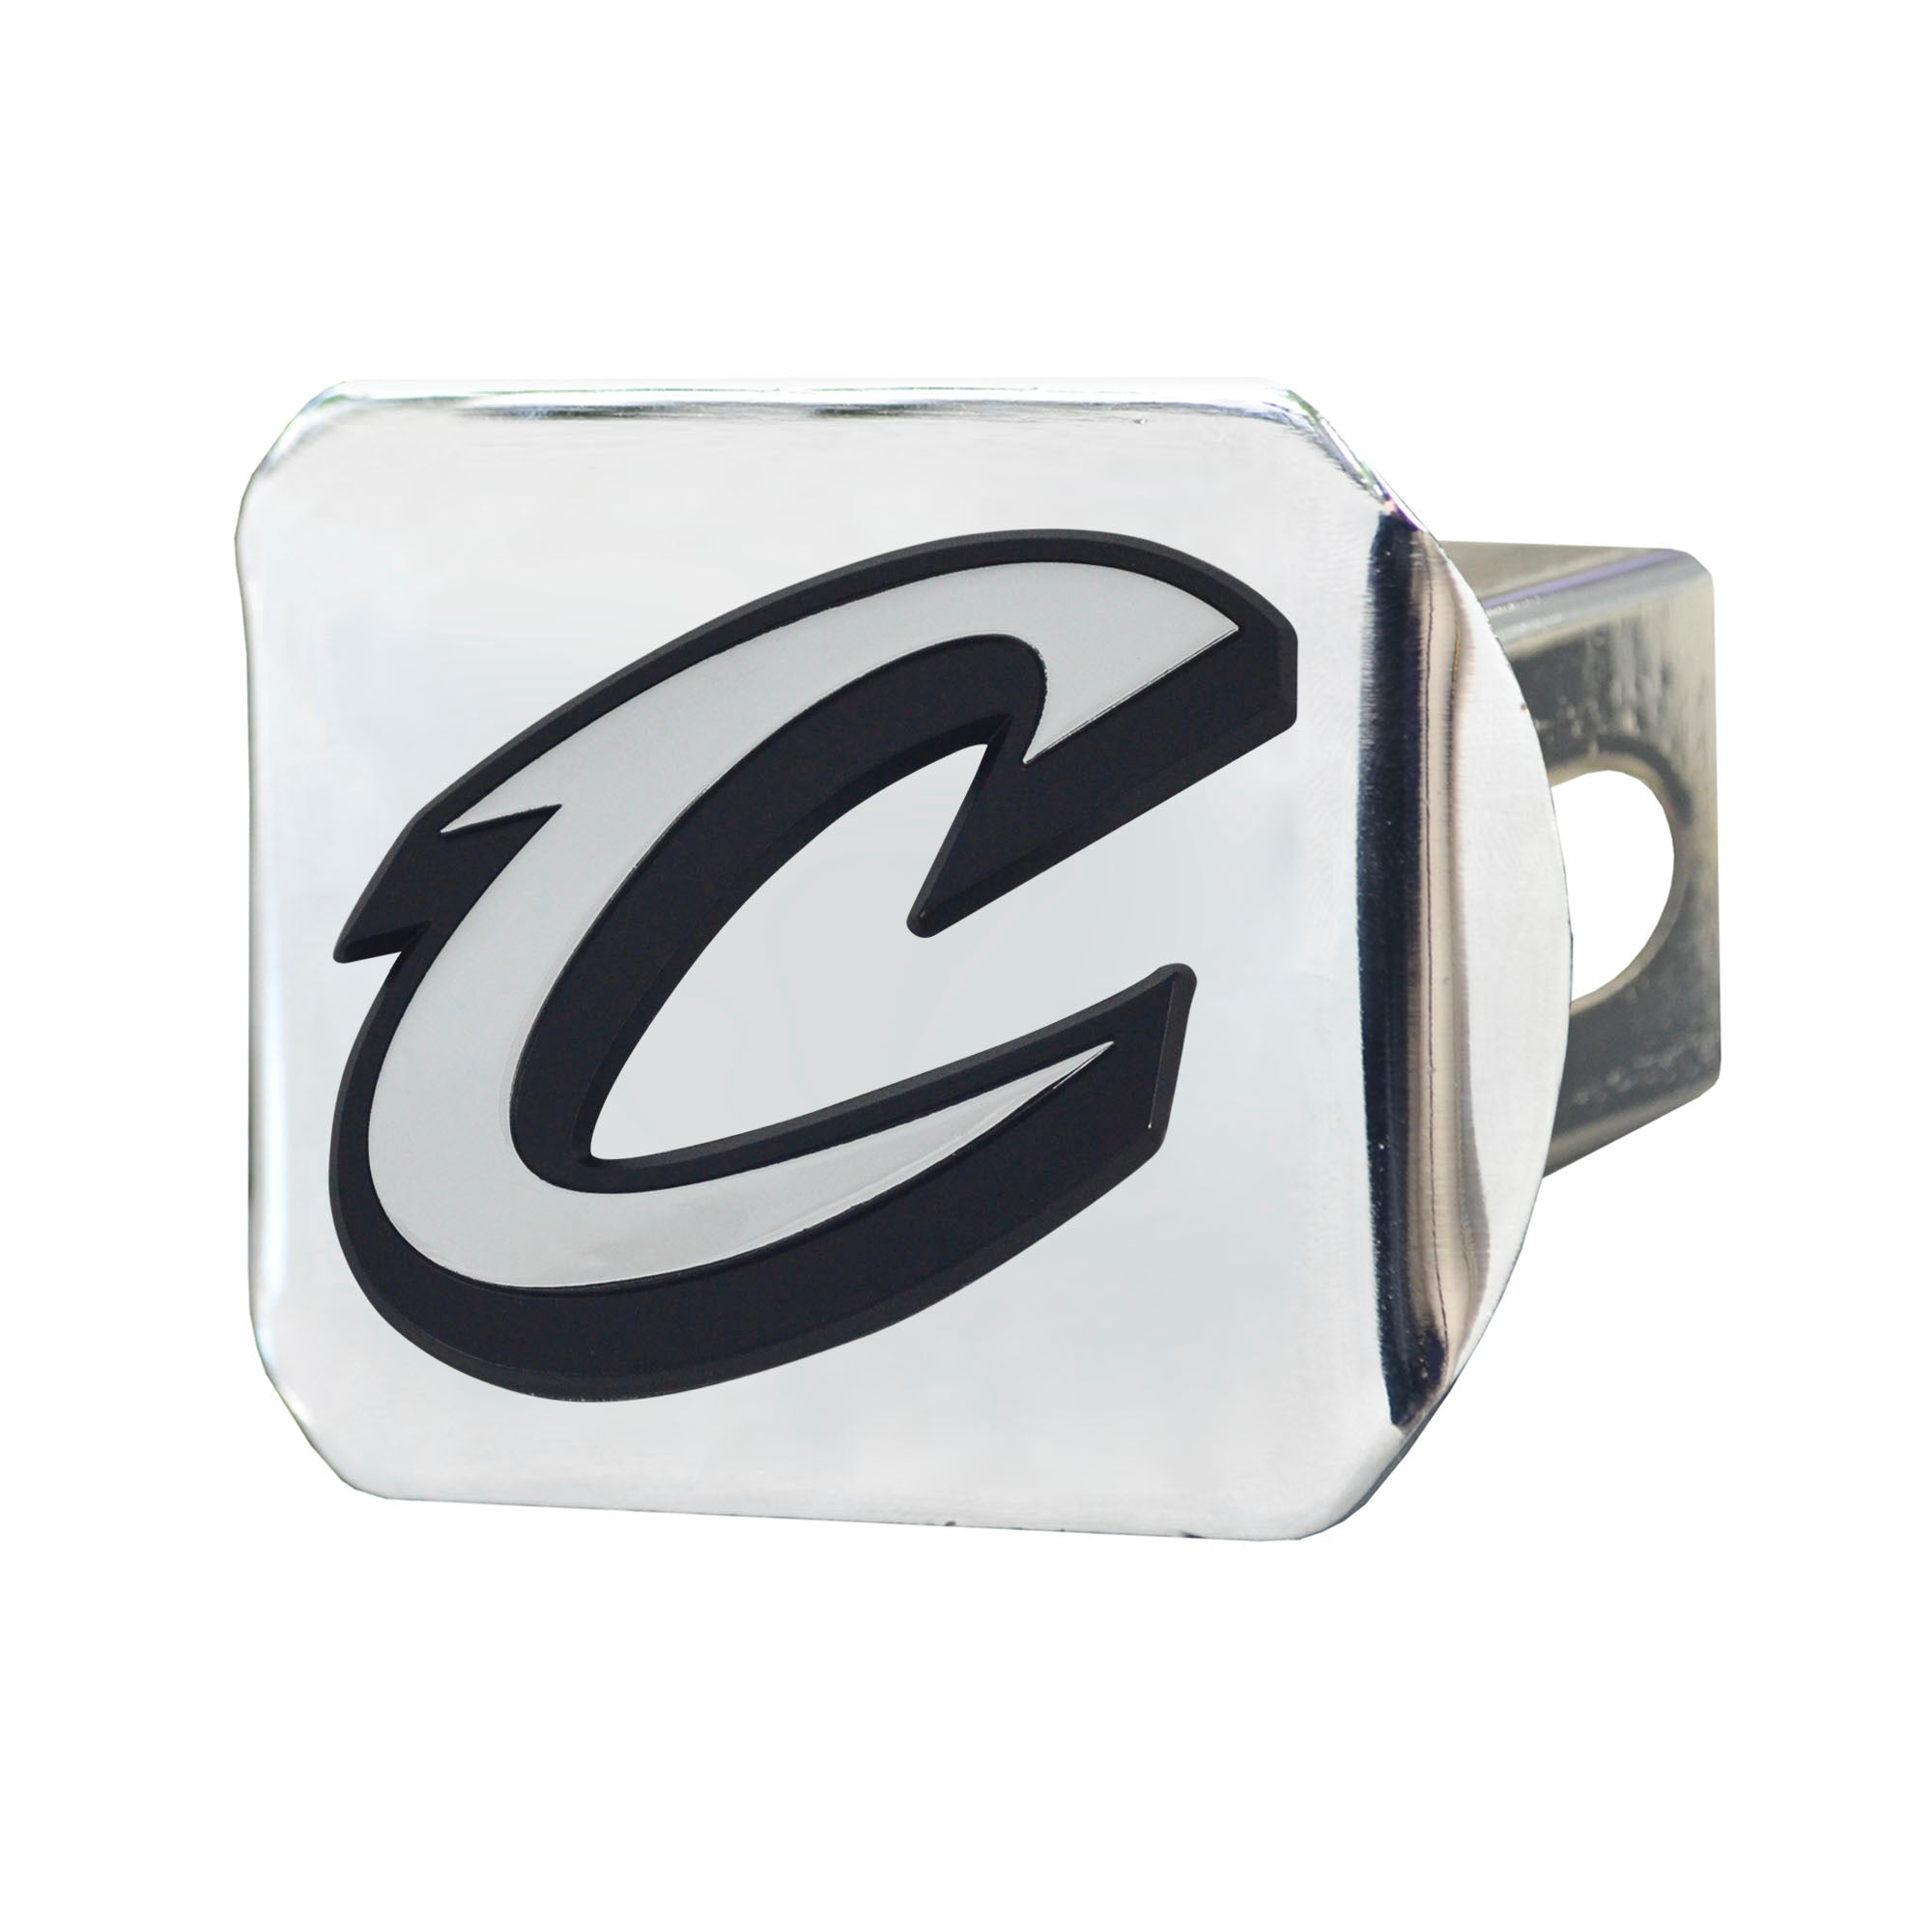 NBA - Cleveland Cavaliers Hitch Cover - Chrome